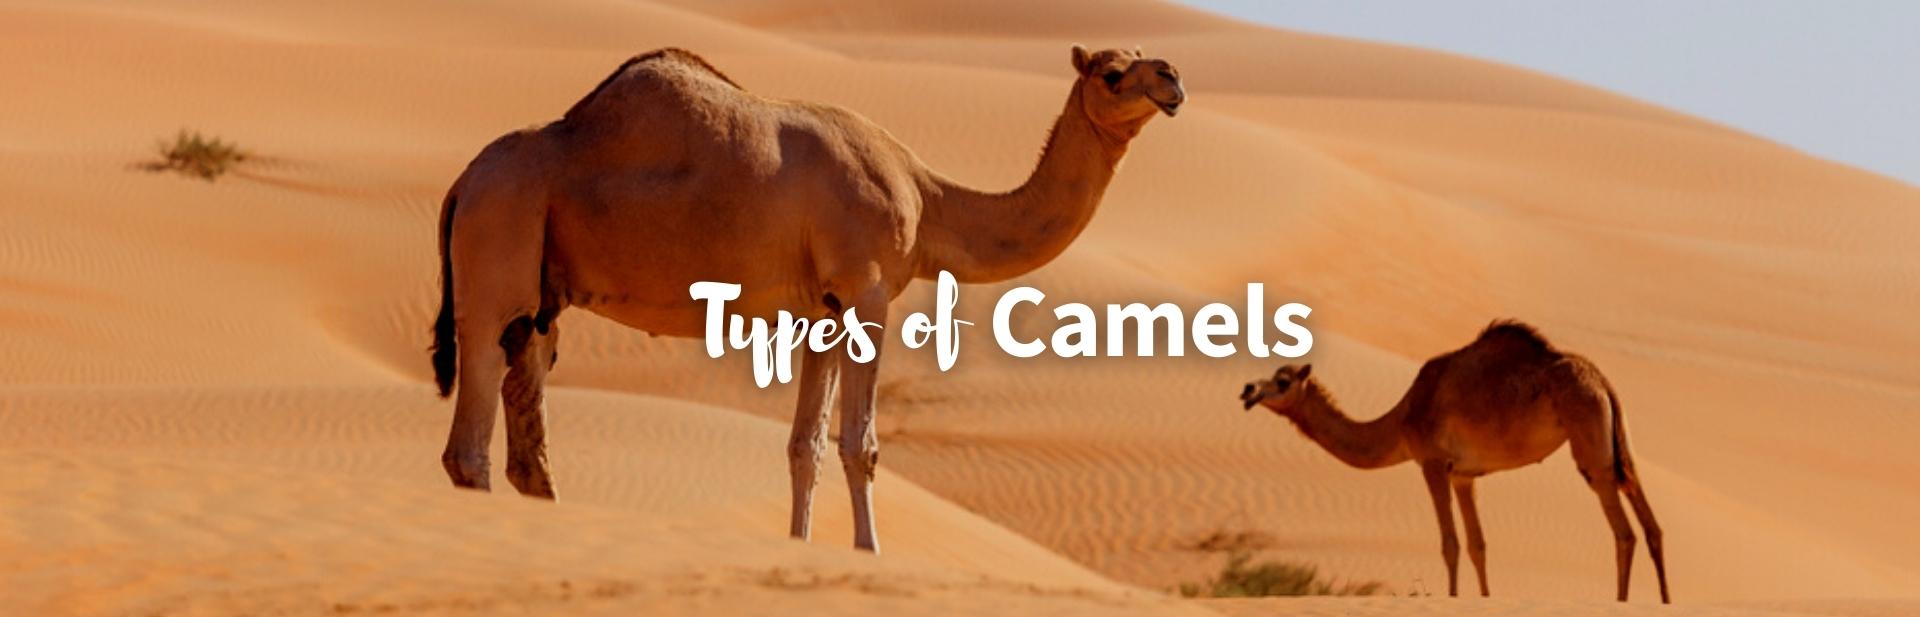 7 Types of Camels: All About the Old and New World Camelids